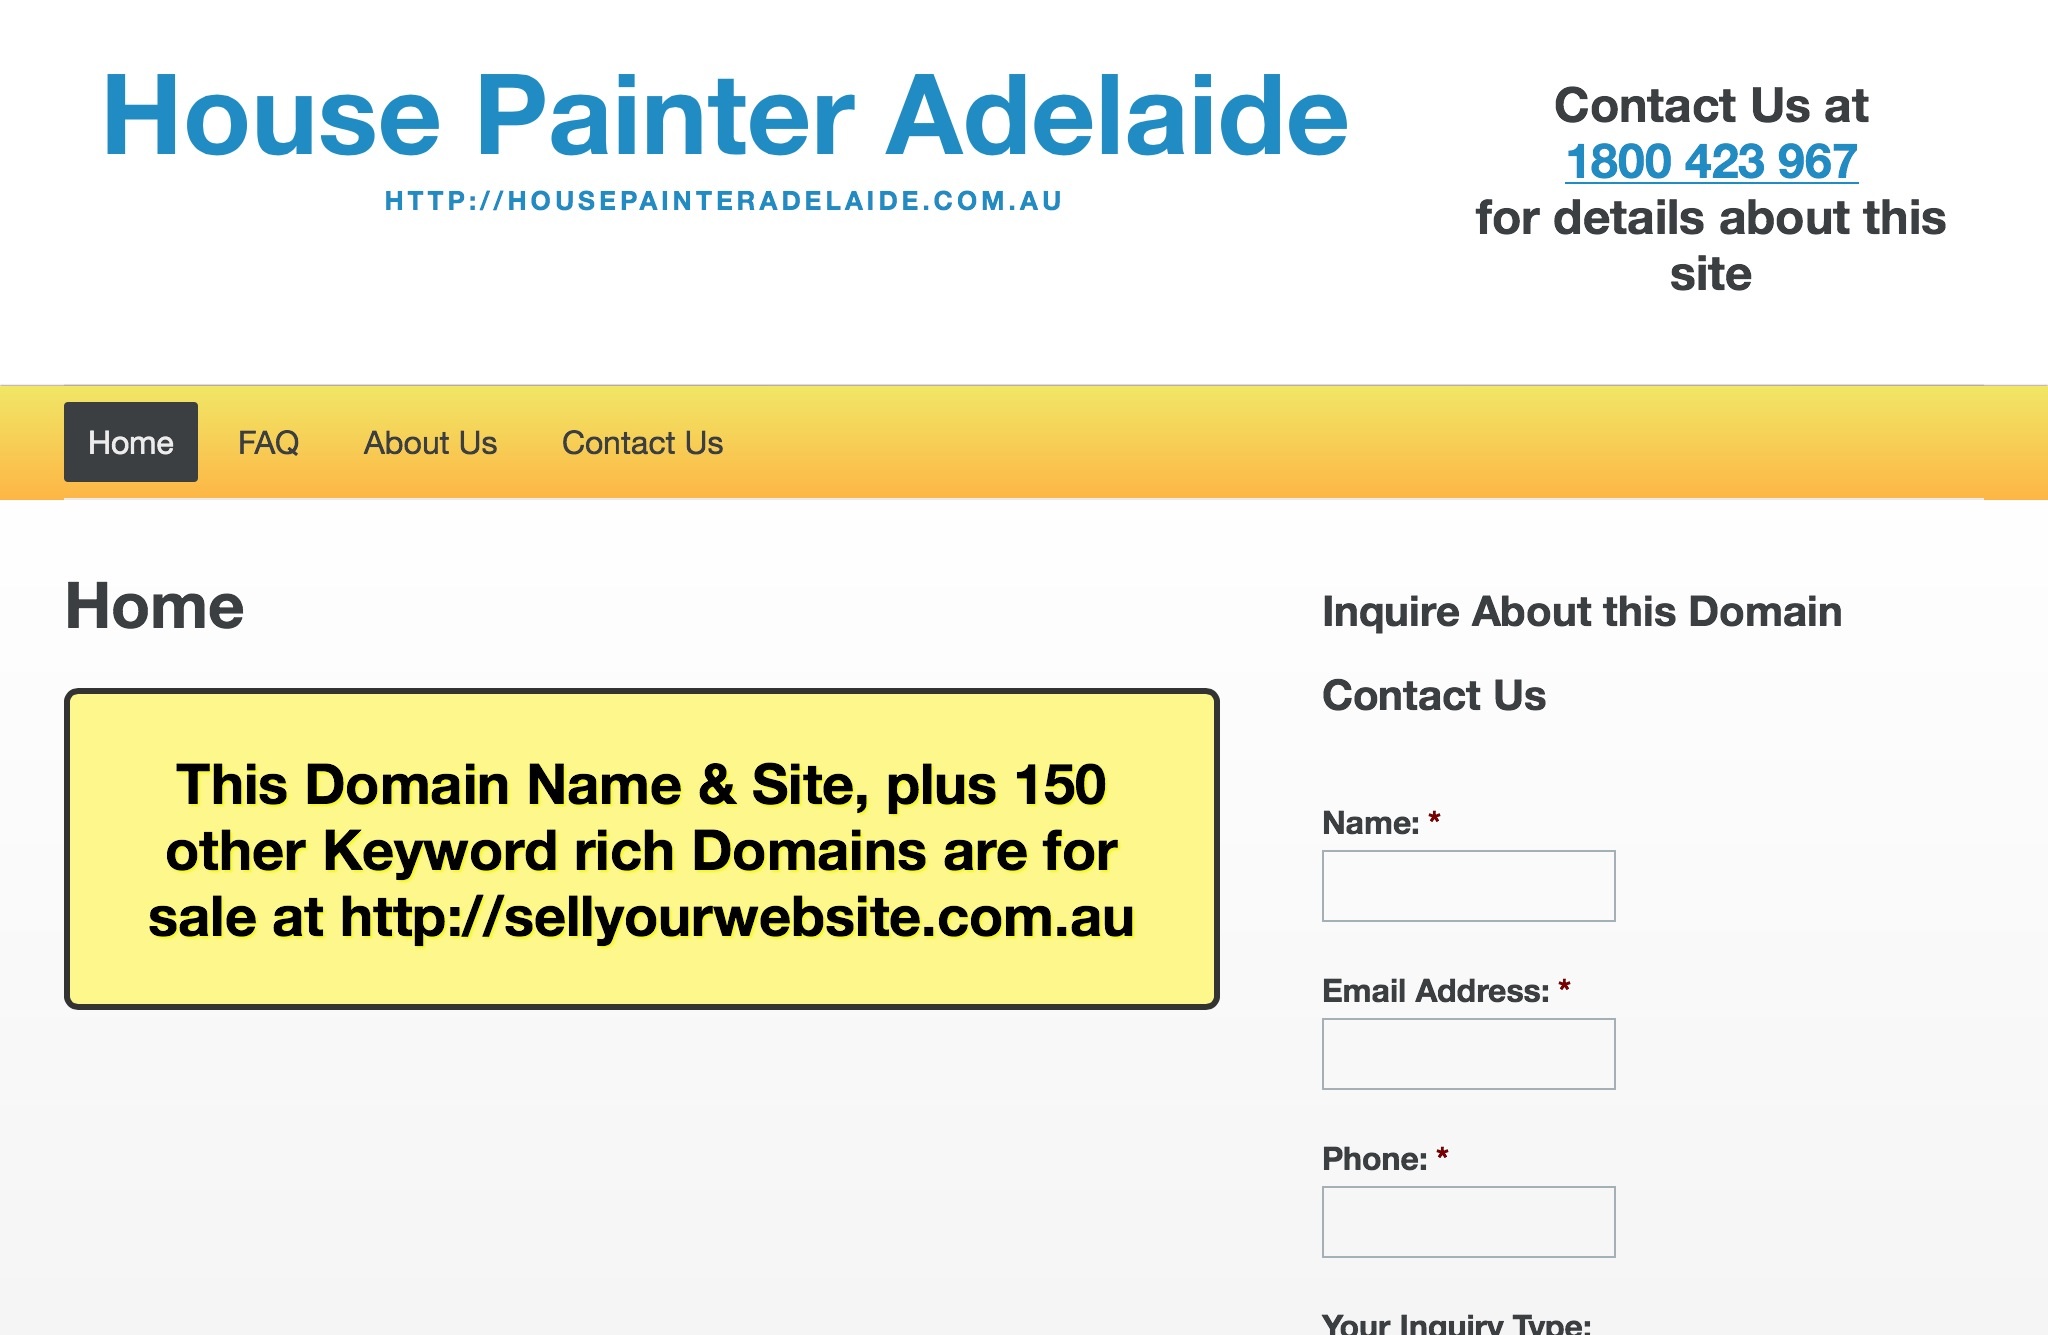 House Painter Adelaide